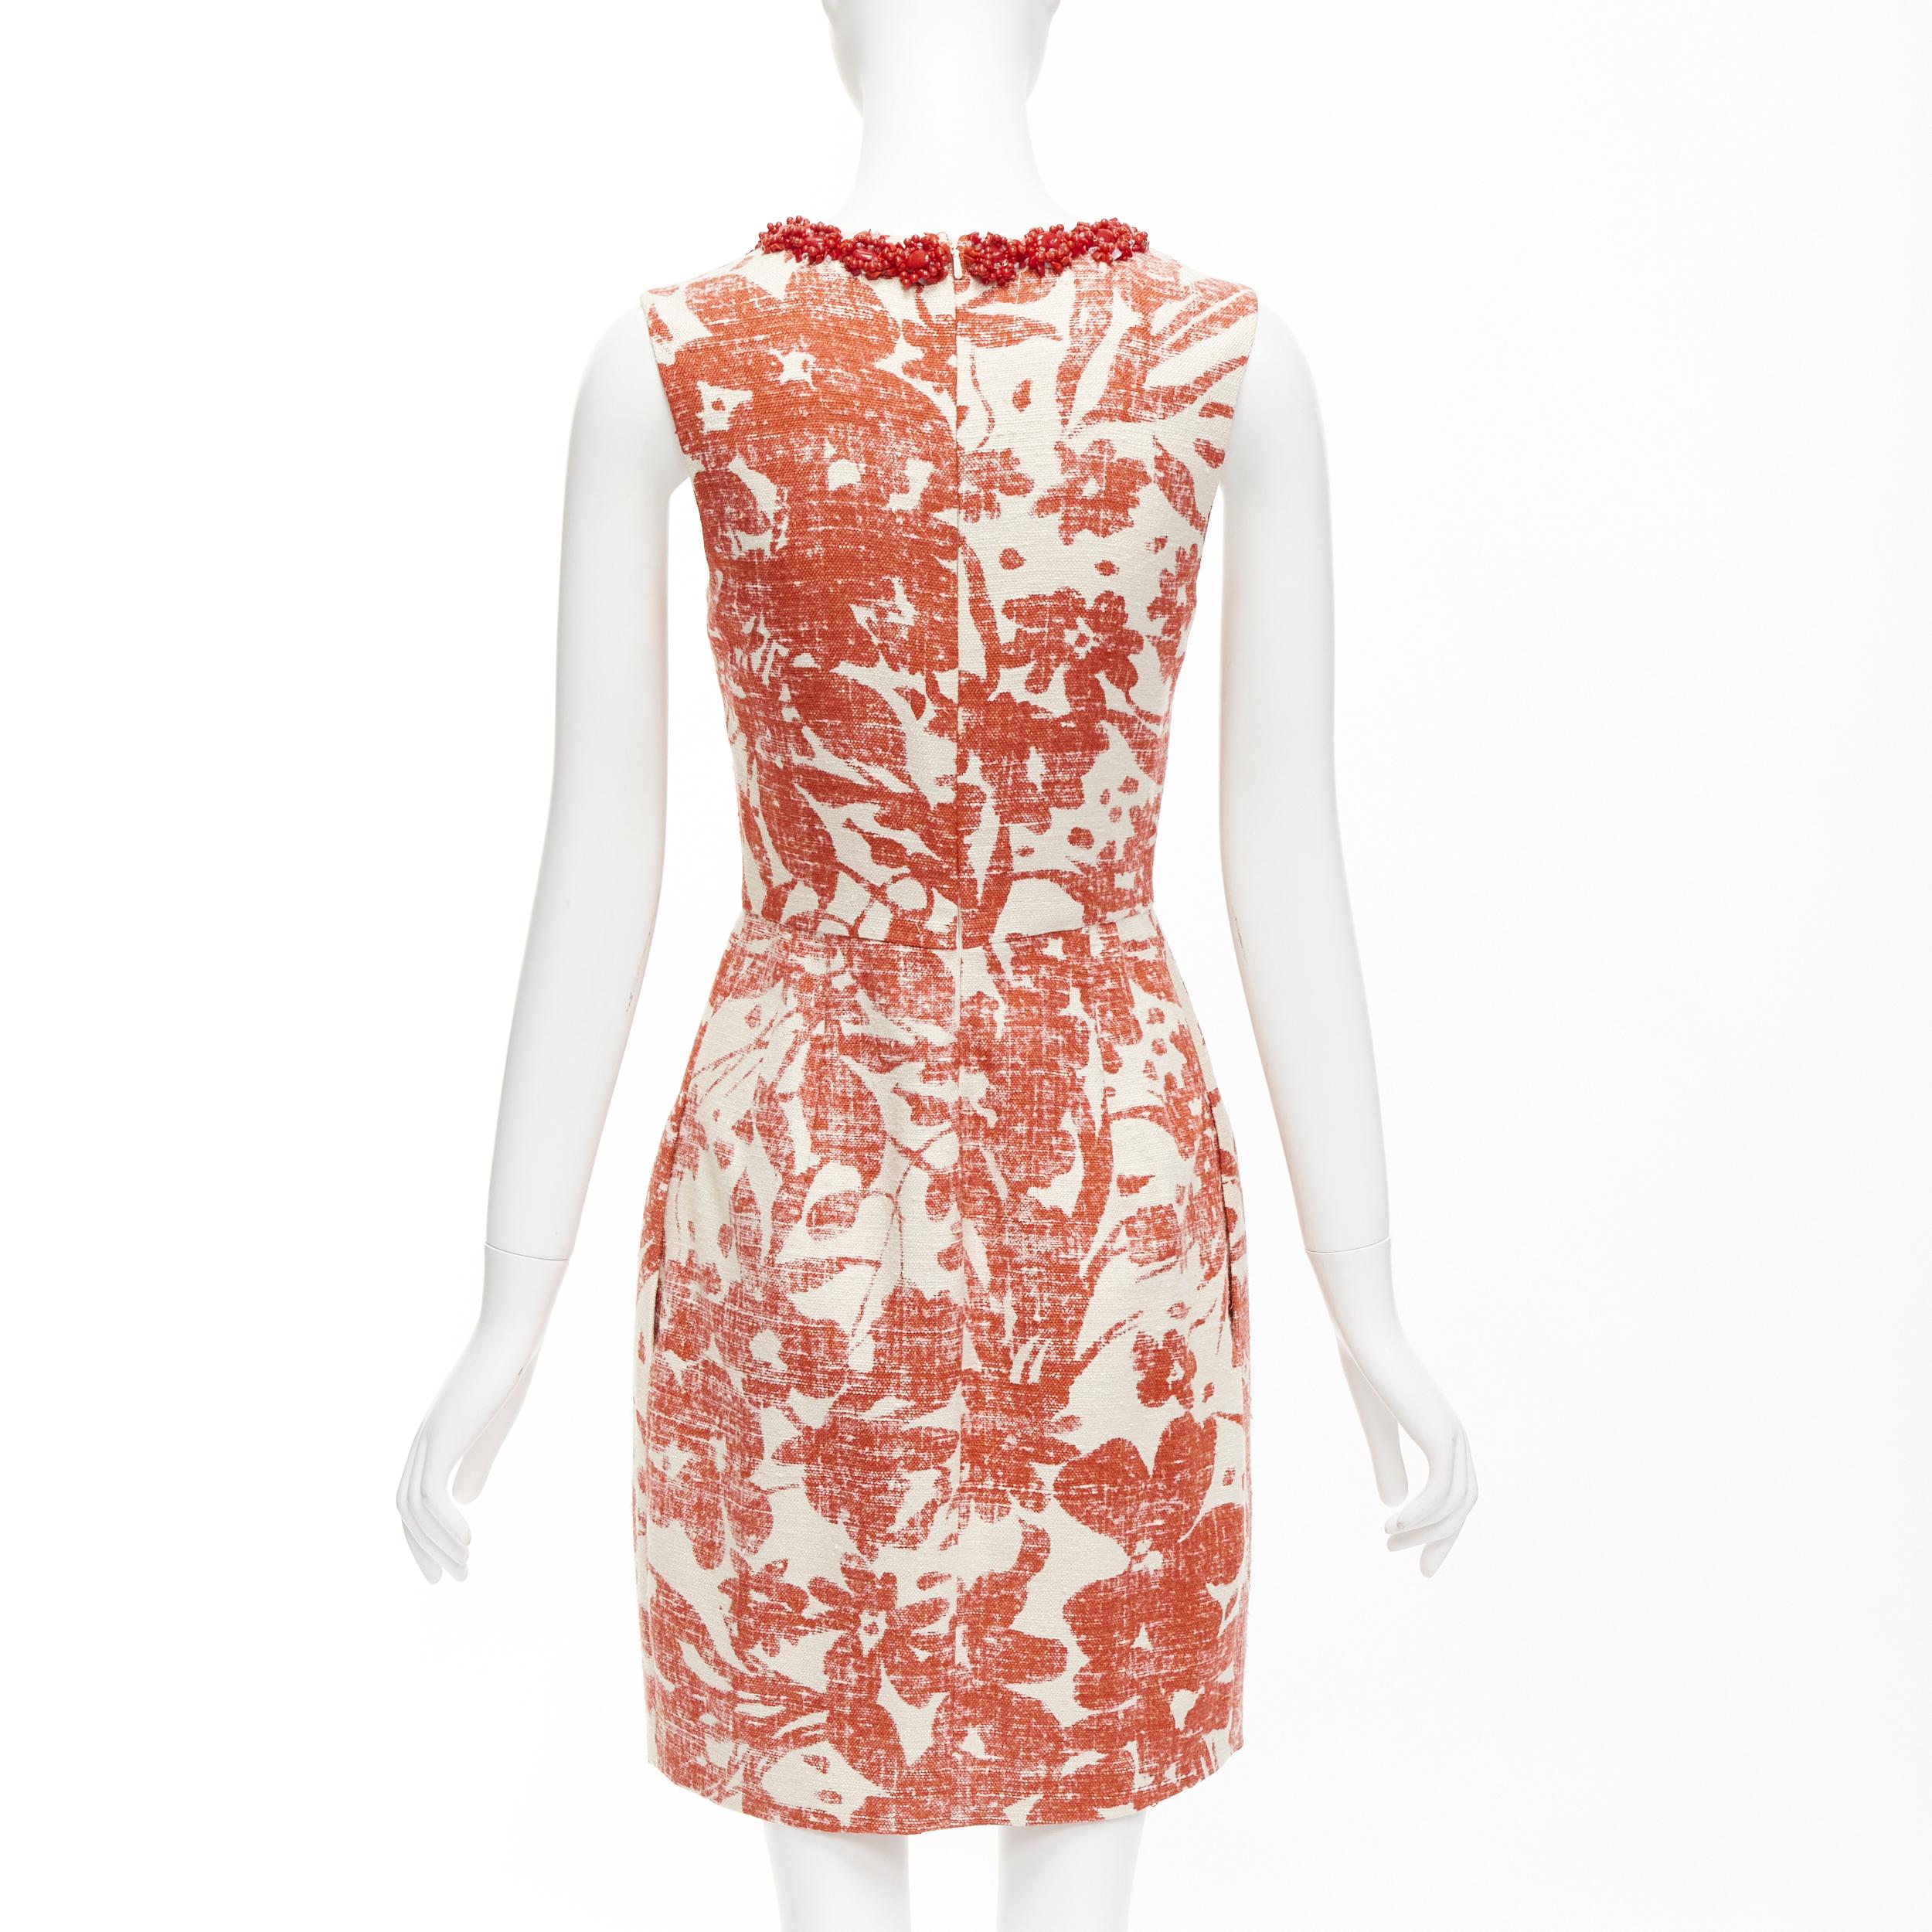 MONIQUE LHUILLIER cream red floral embellished collar sheath dress For Sale 1